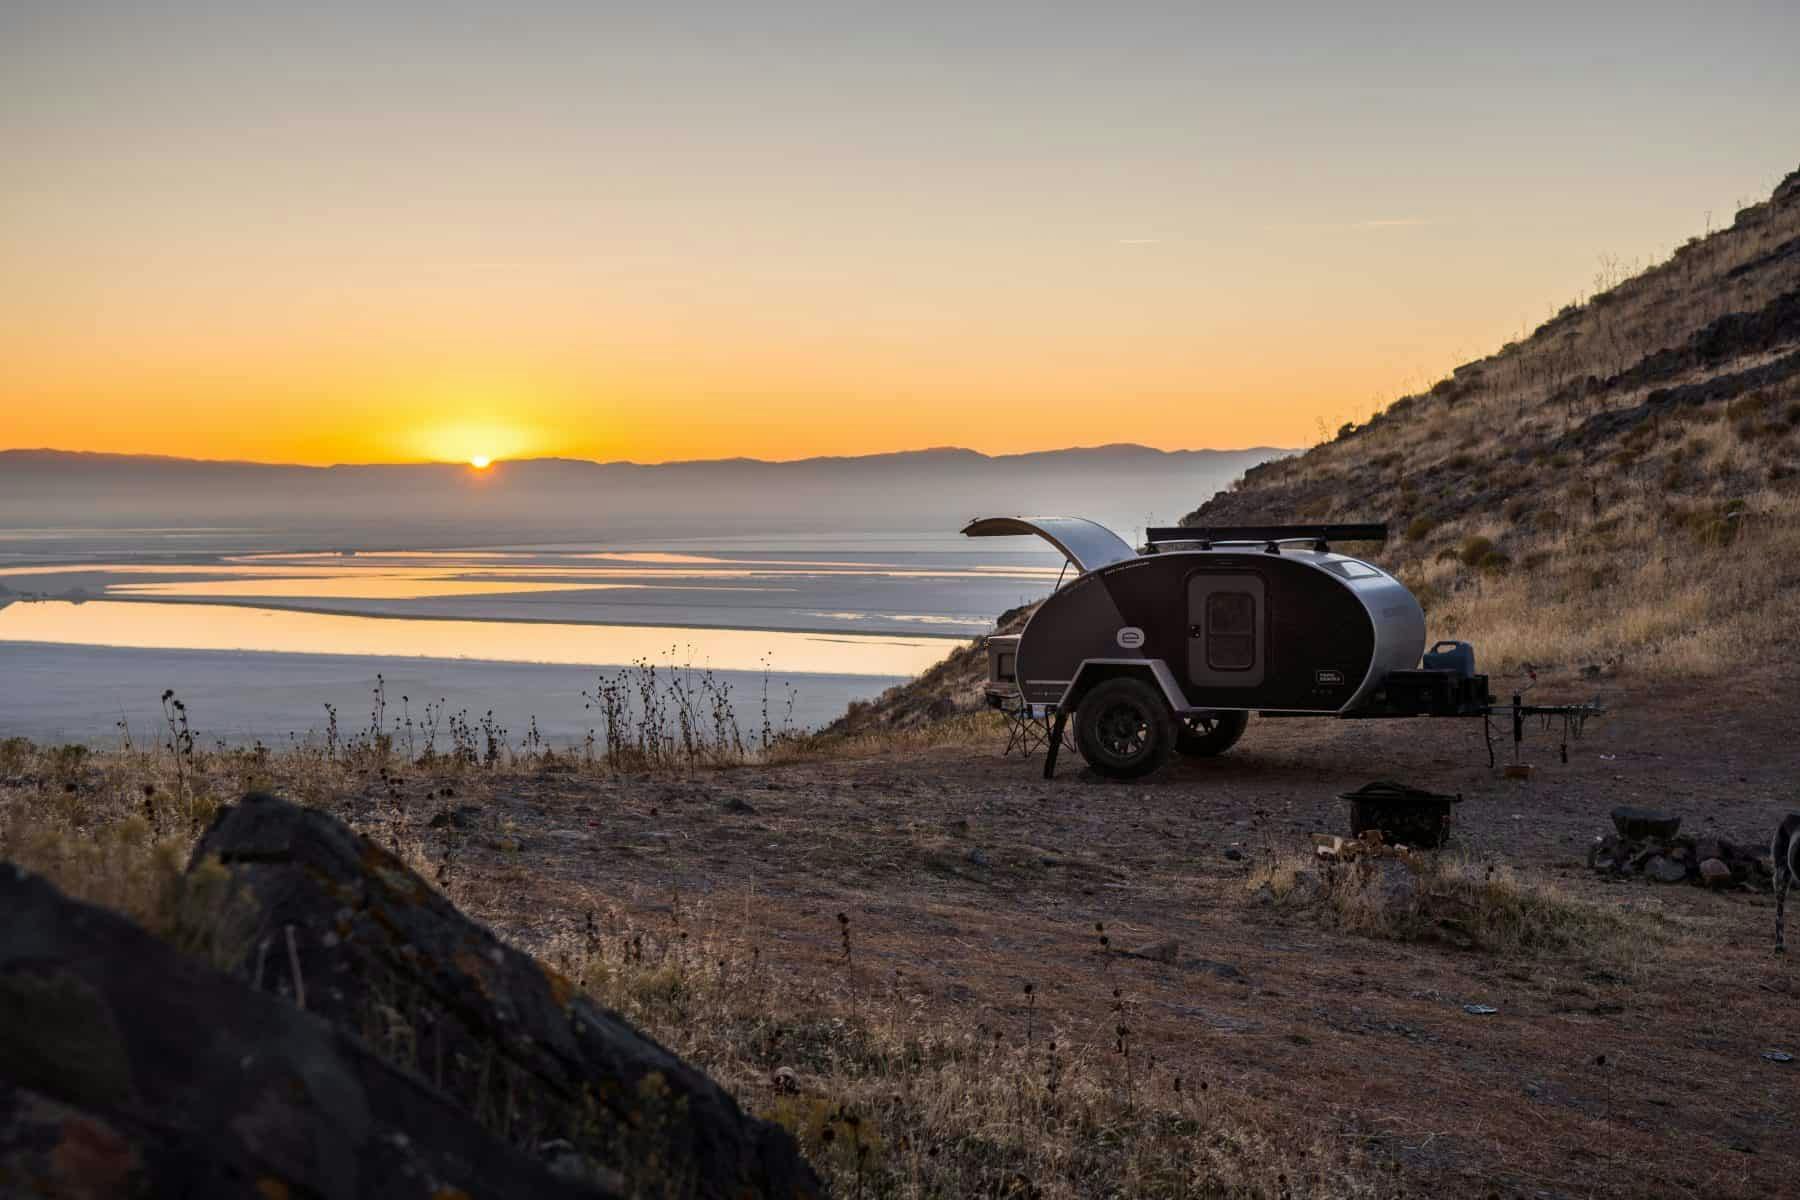 A teardrop trailer parked at Stansbury Island (Bureau of Land Management)